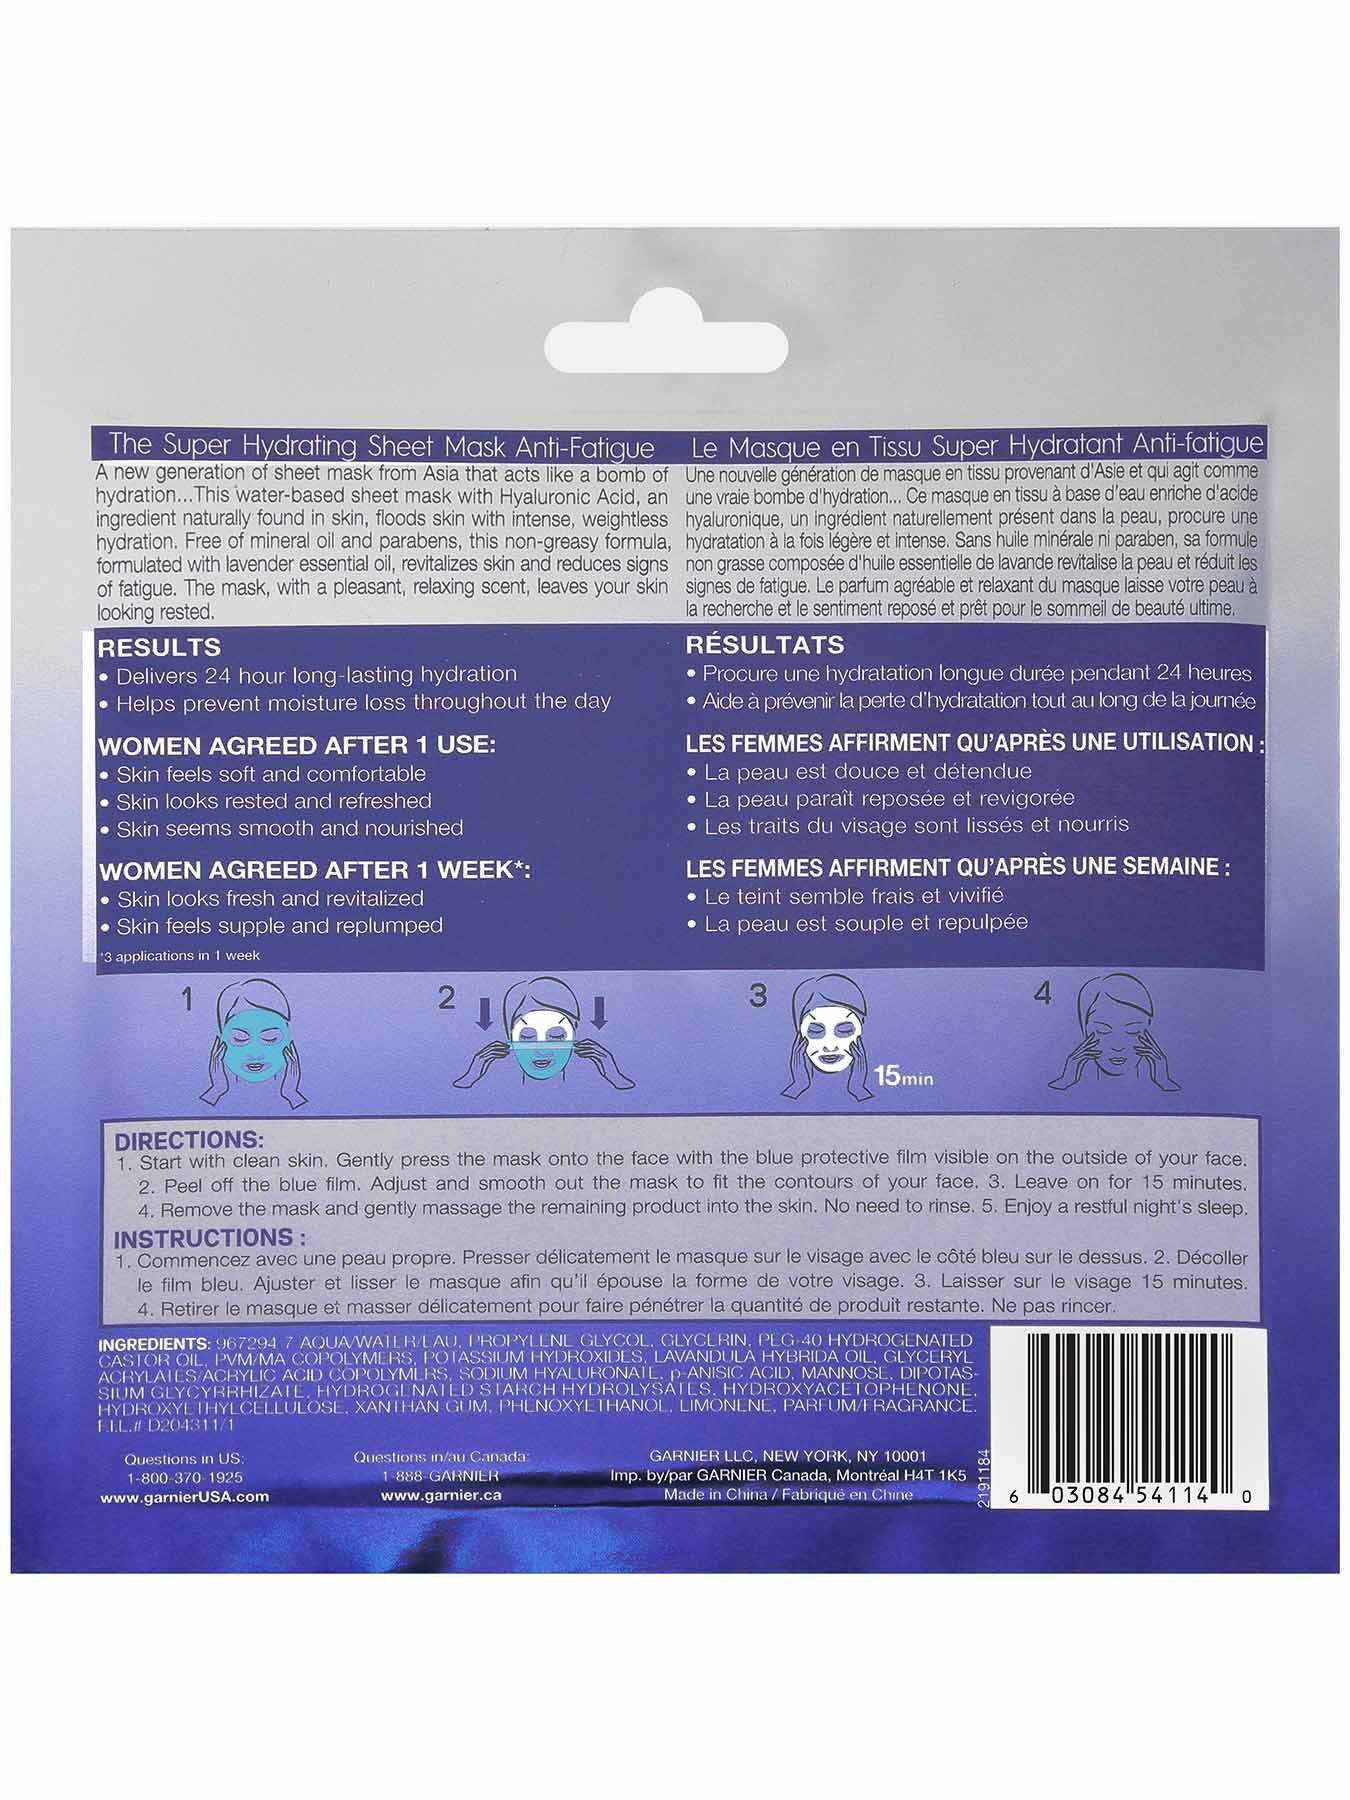 Back view of The Super Hydrating Sheet Mask - Anti-Fatigue.